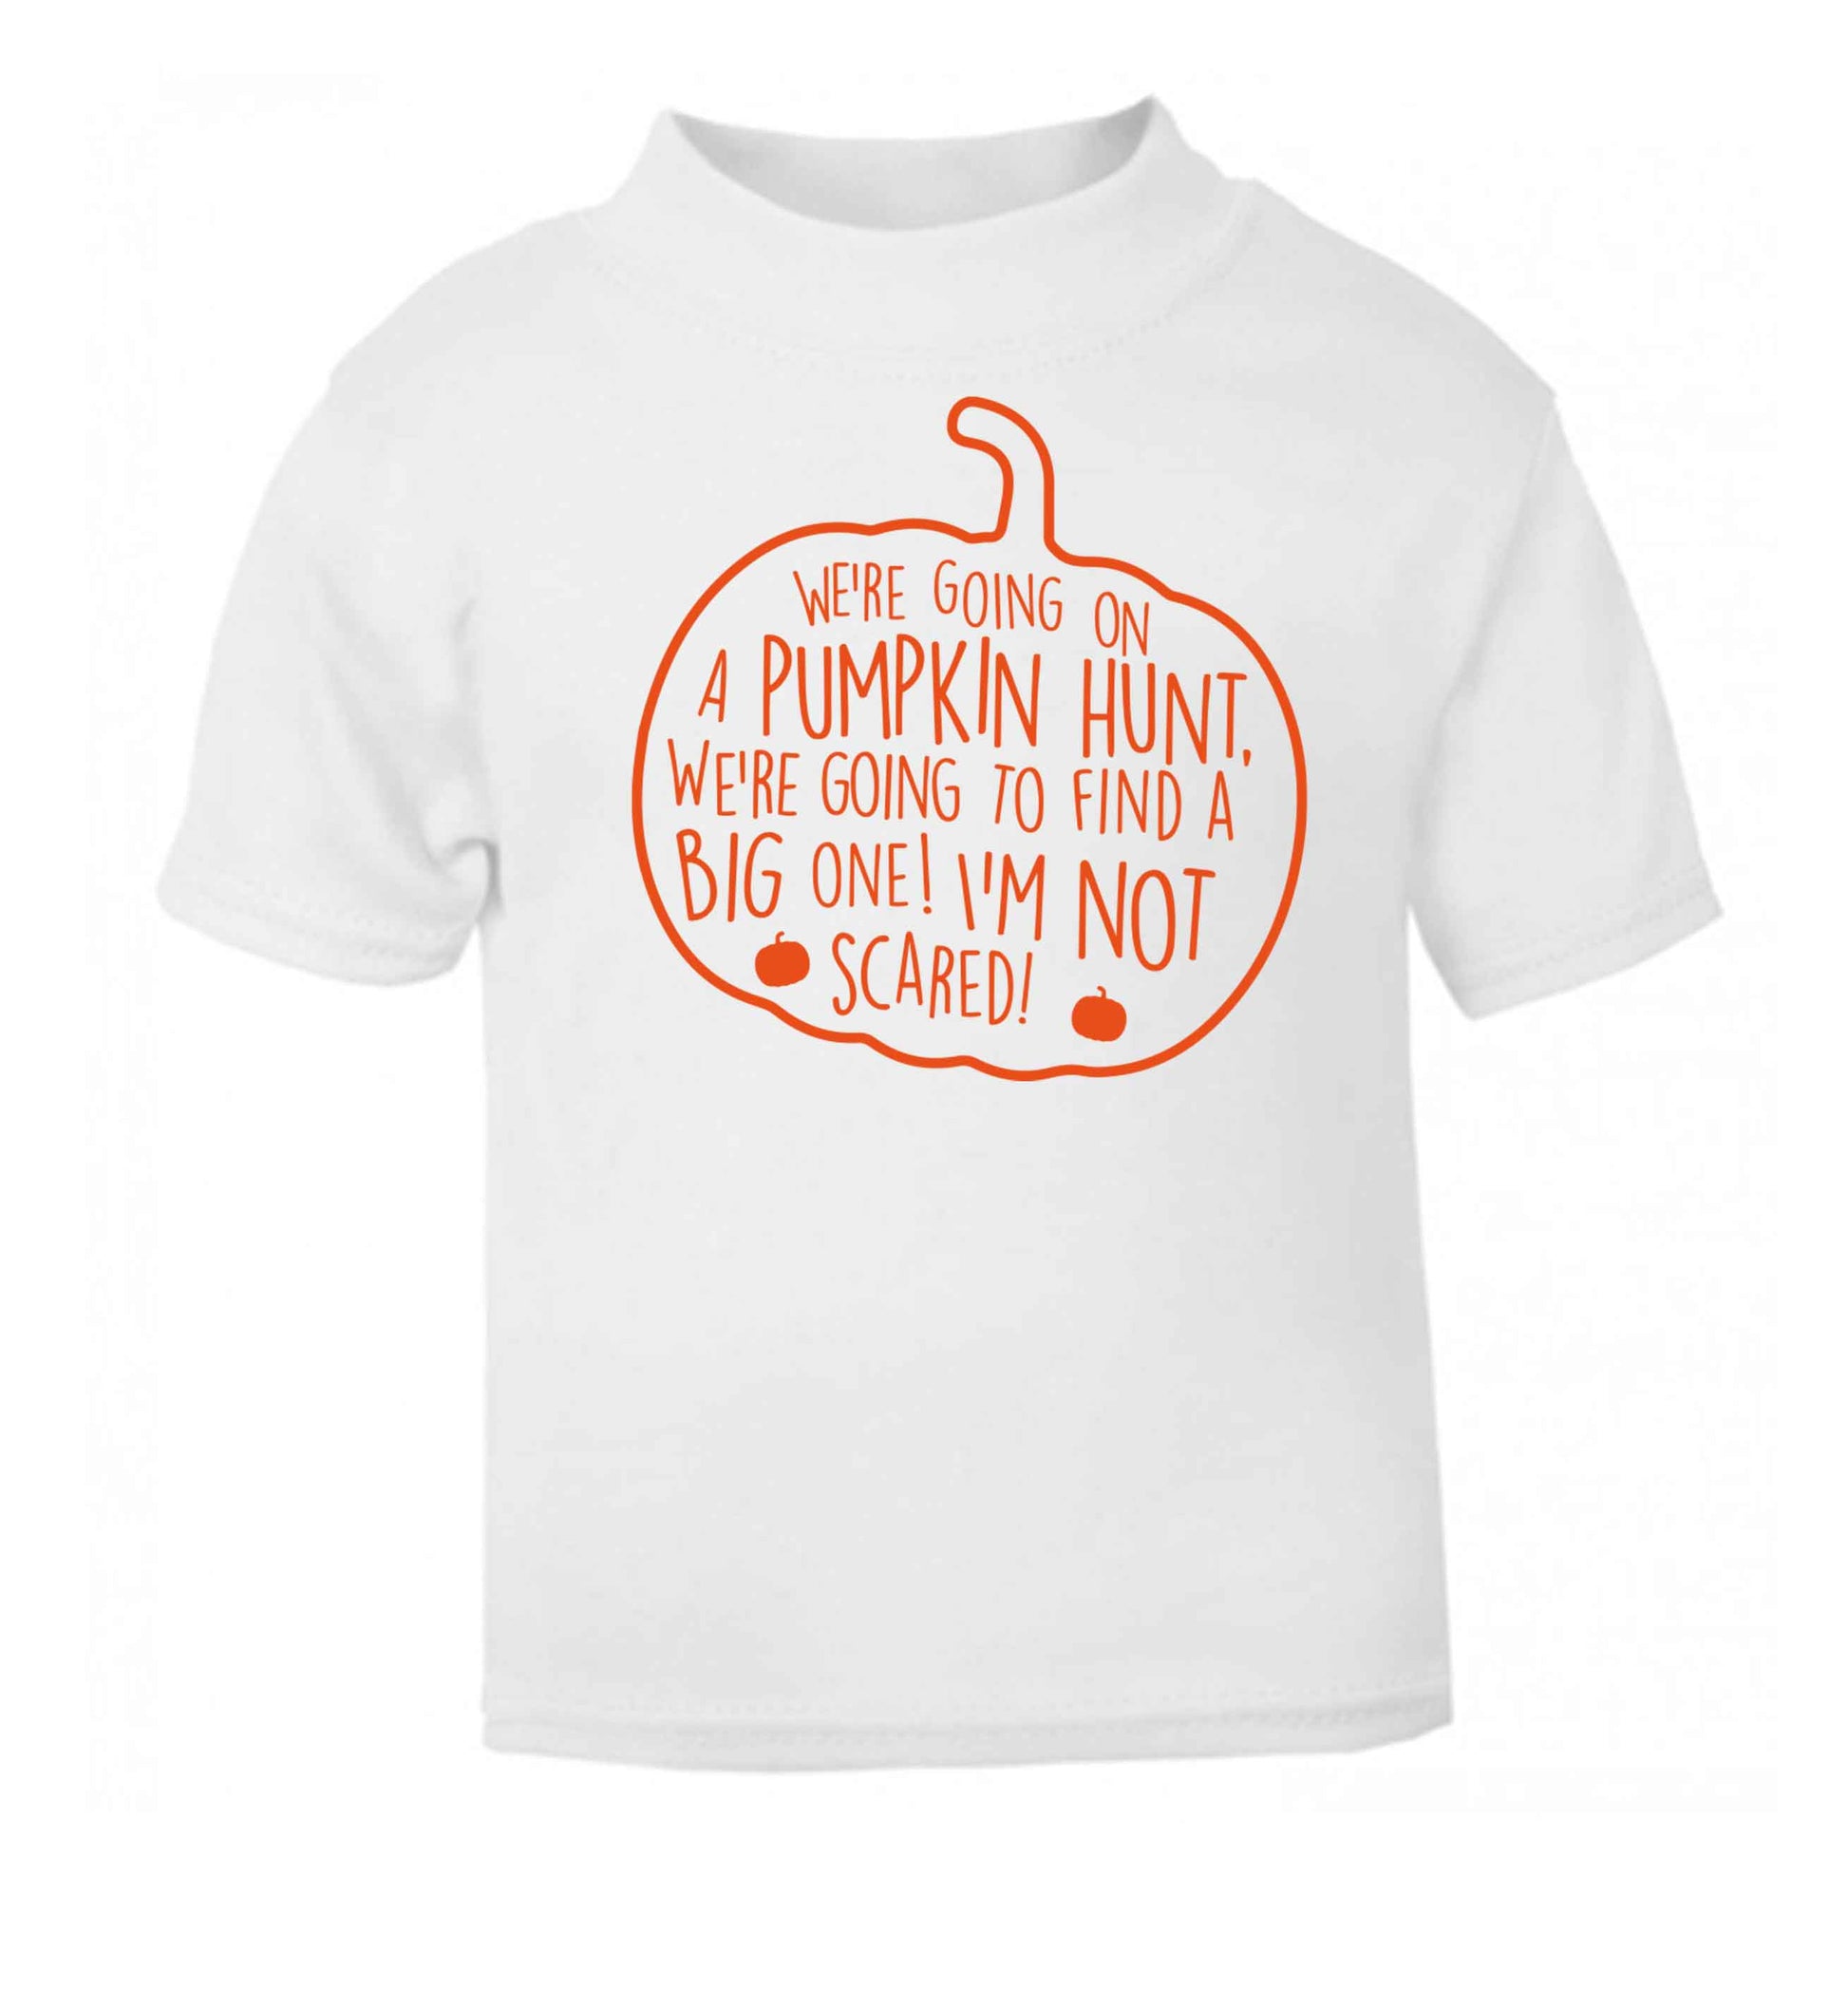 I'm the reason all the halloween sweets are gone baby toddler Tshirt 2 Years